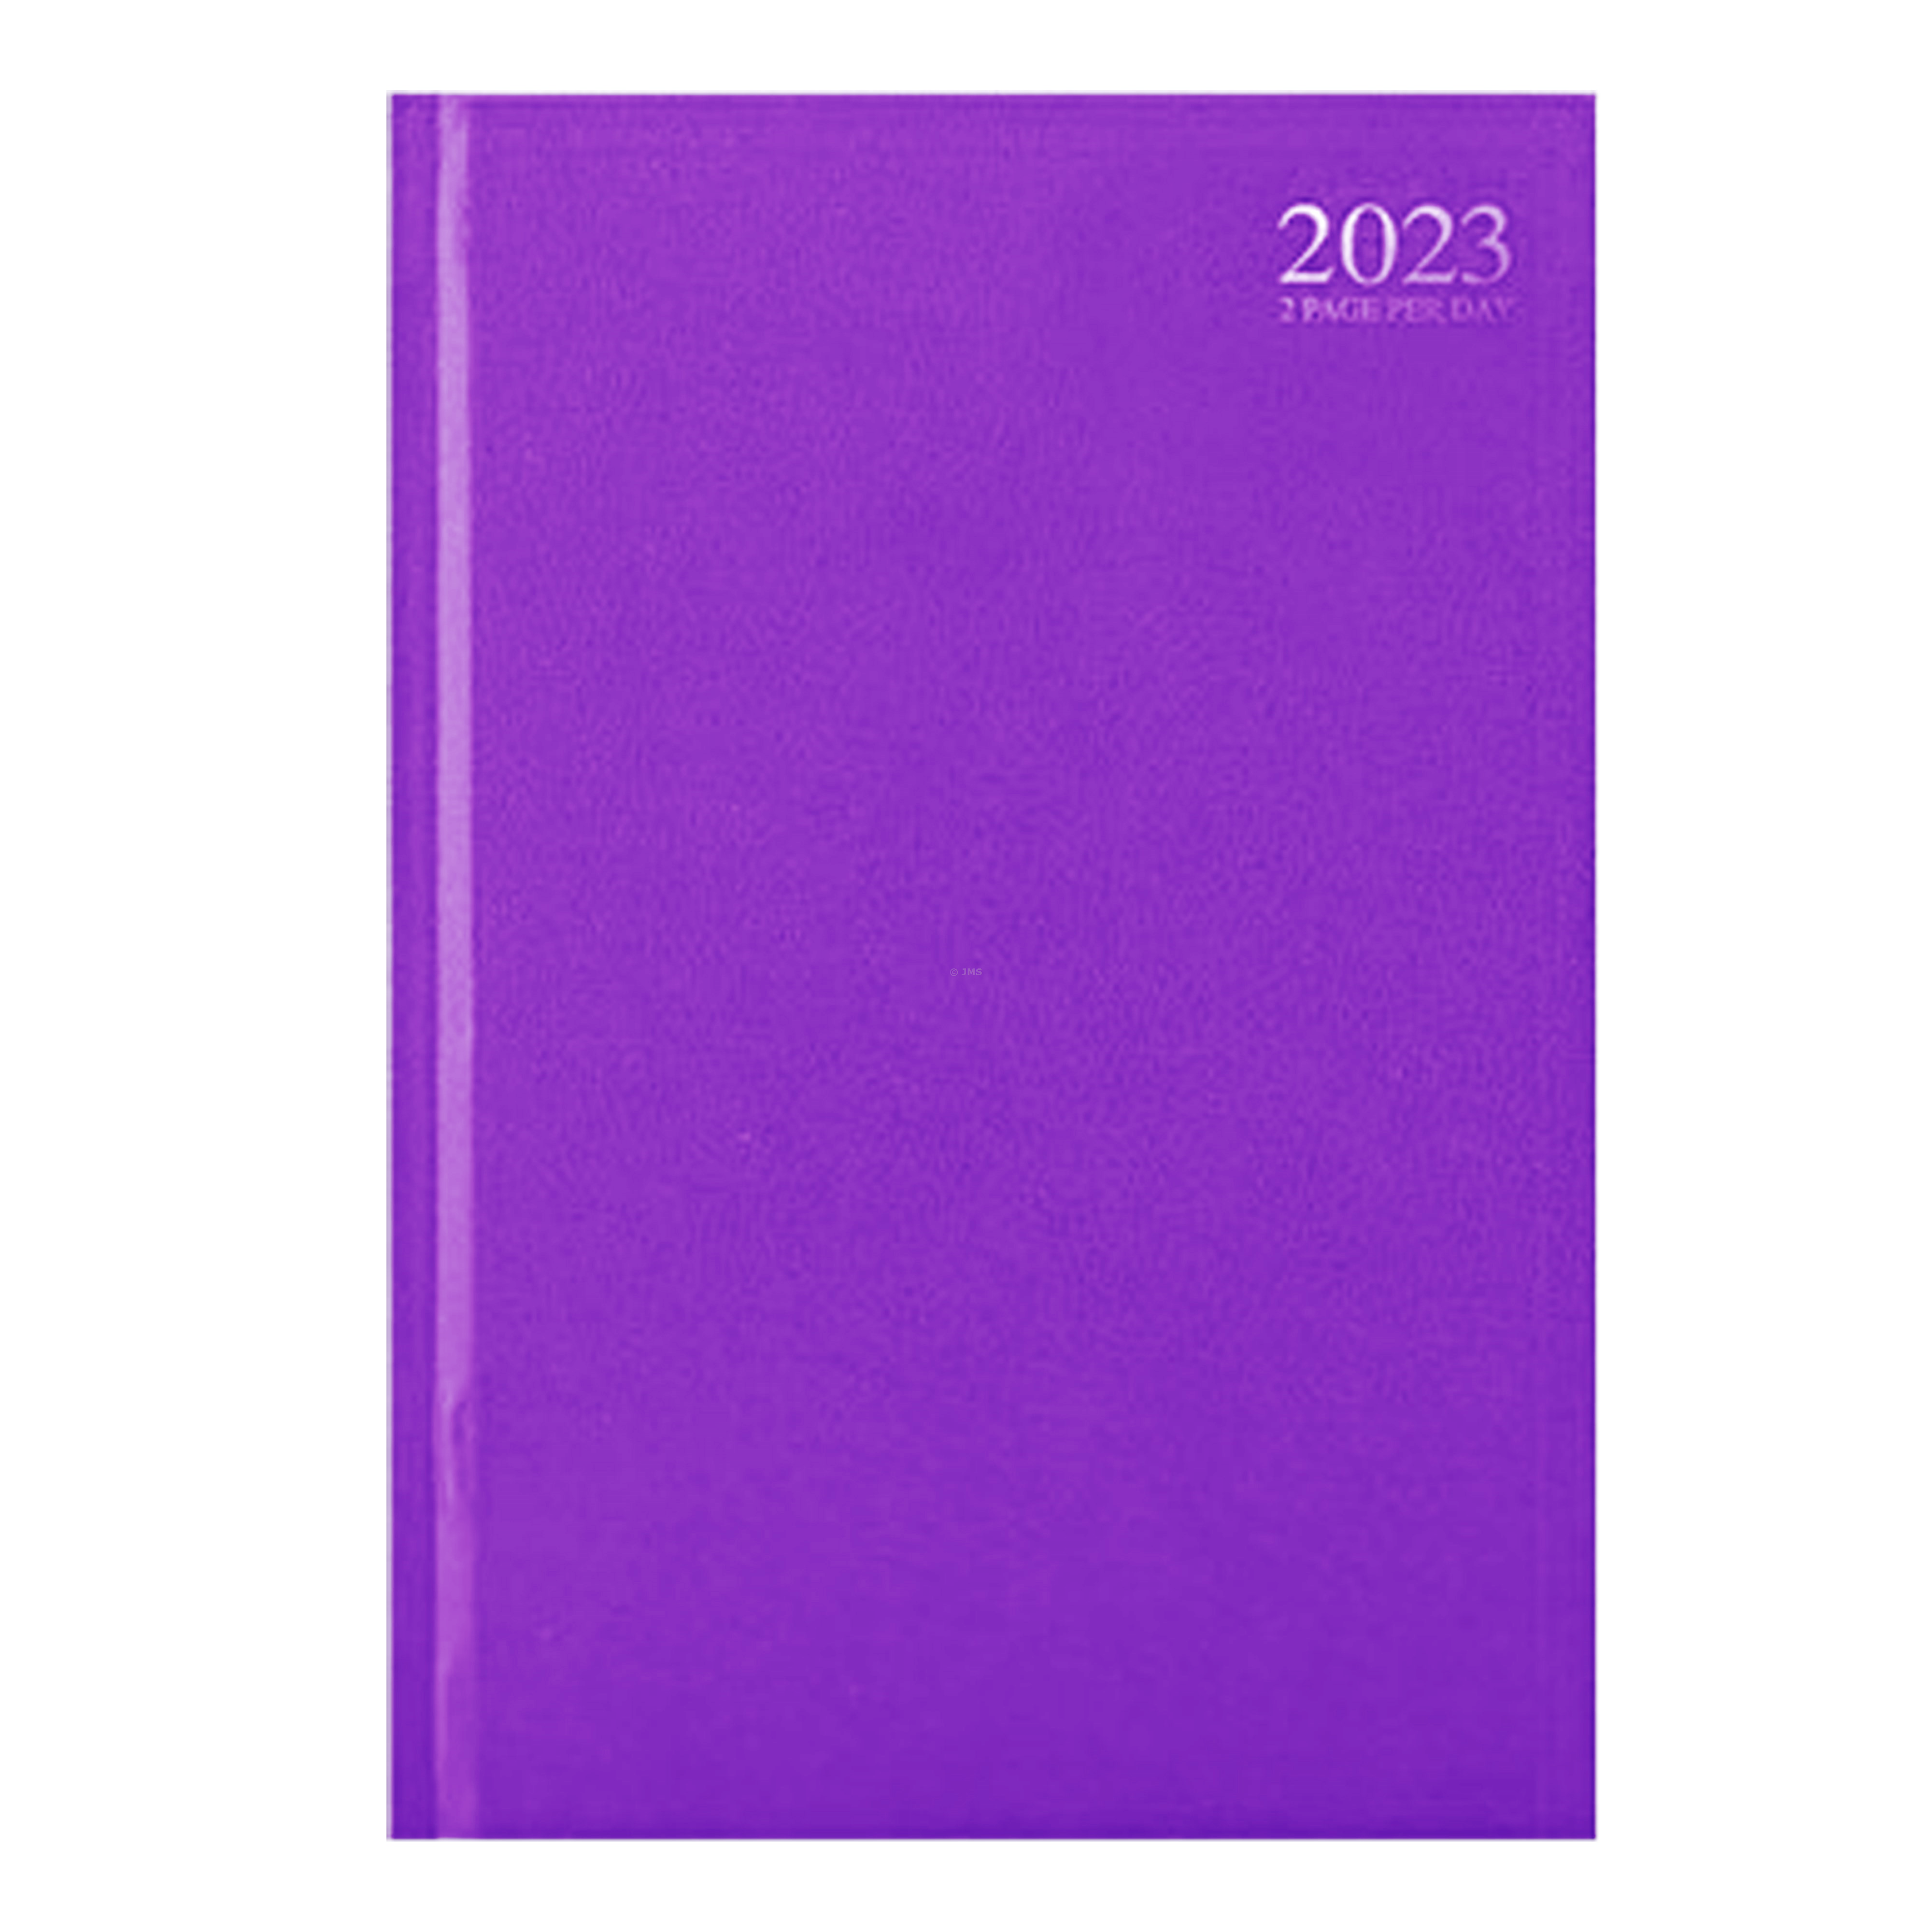 2023 A4 PURPLE Day A Page (2 Pages) Appointment Office Desk Diary Hardback Cover